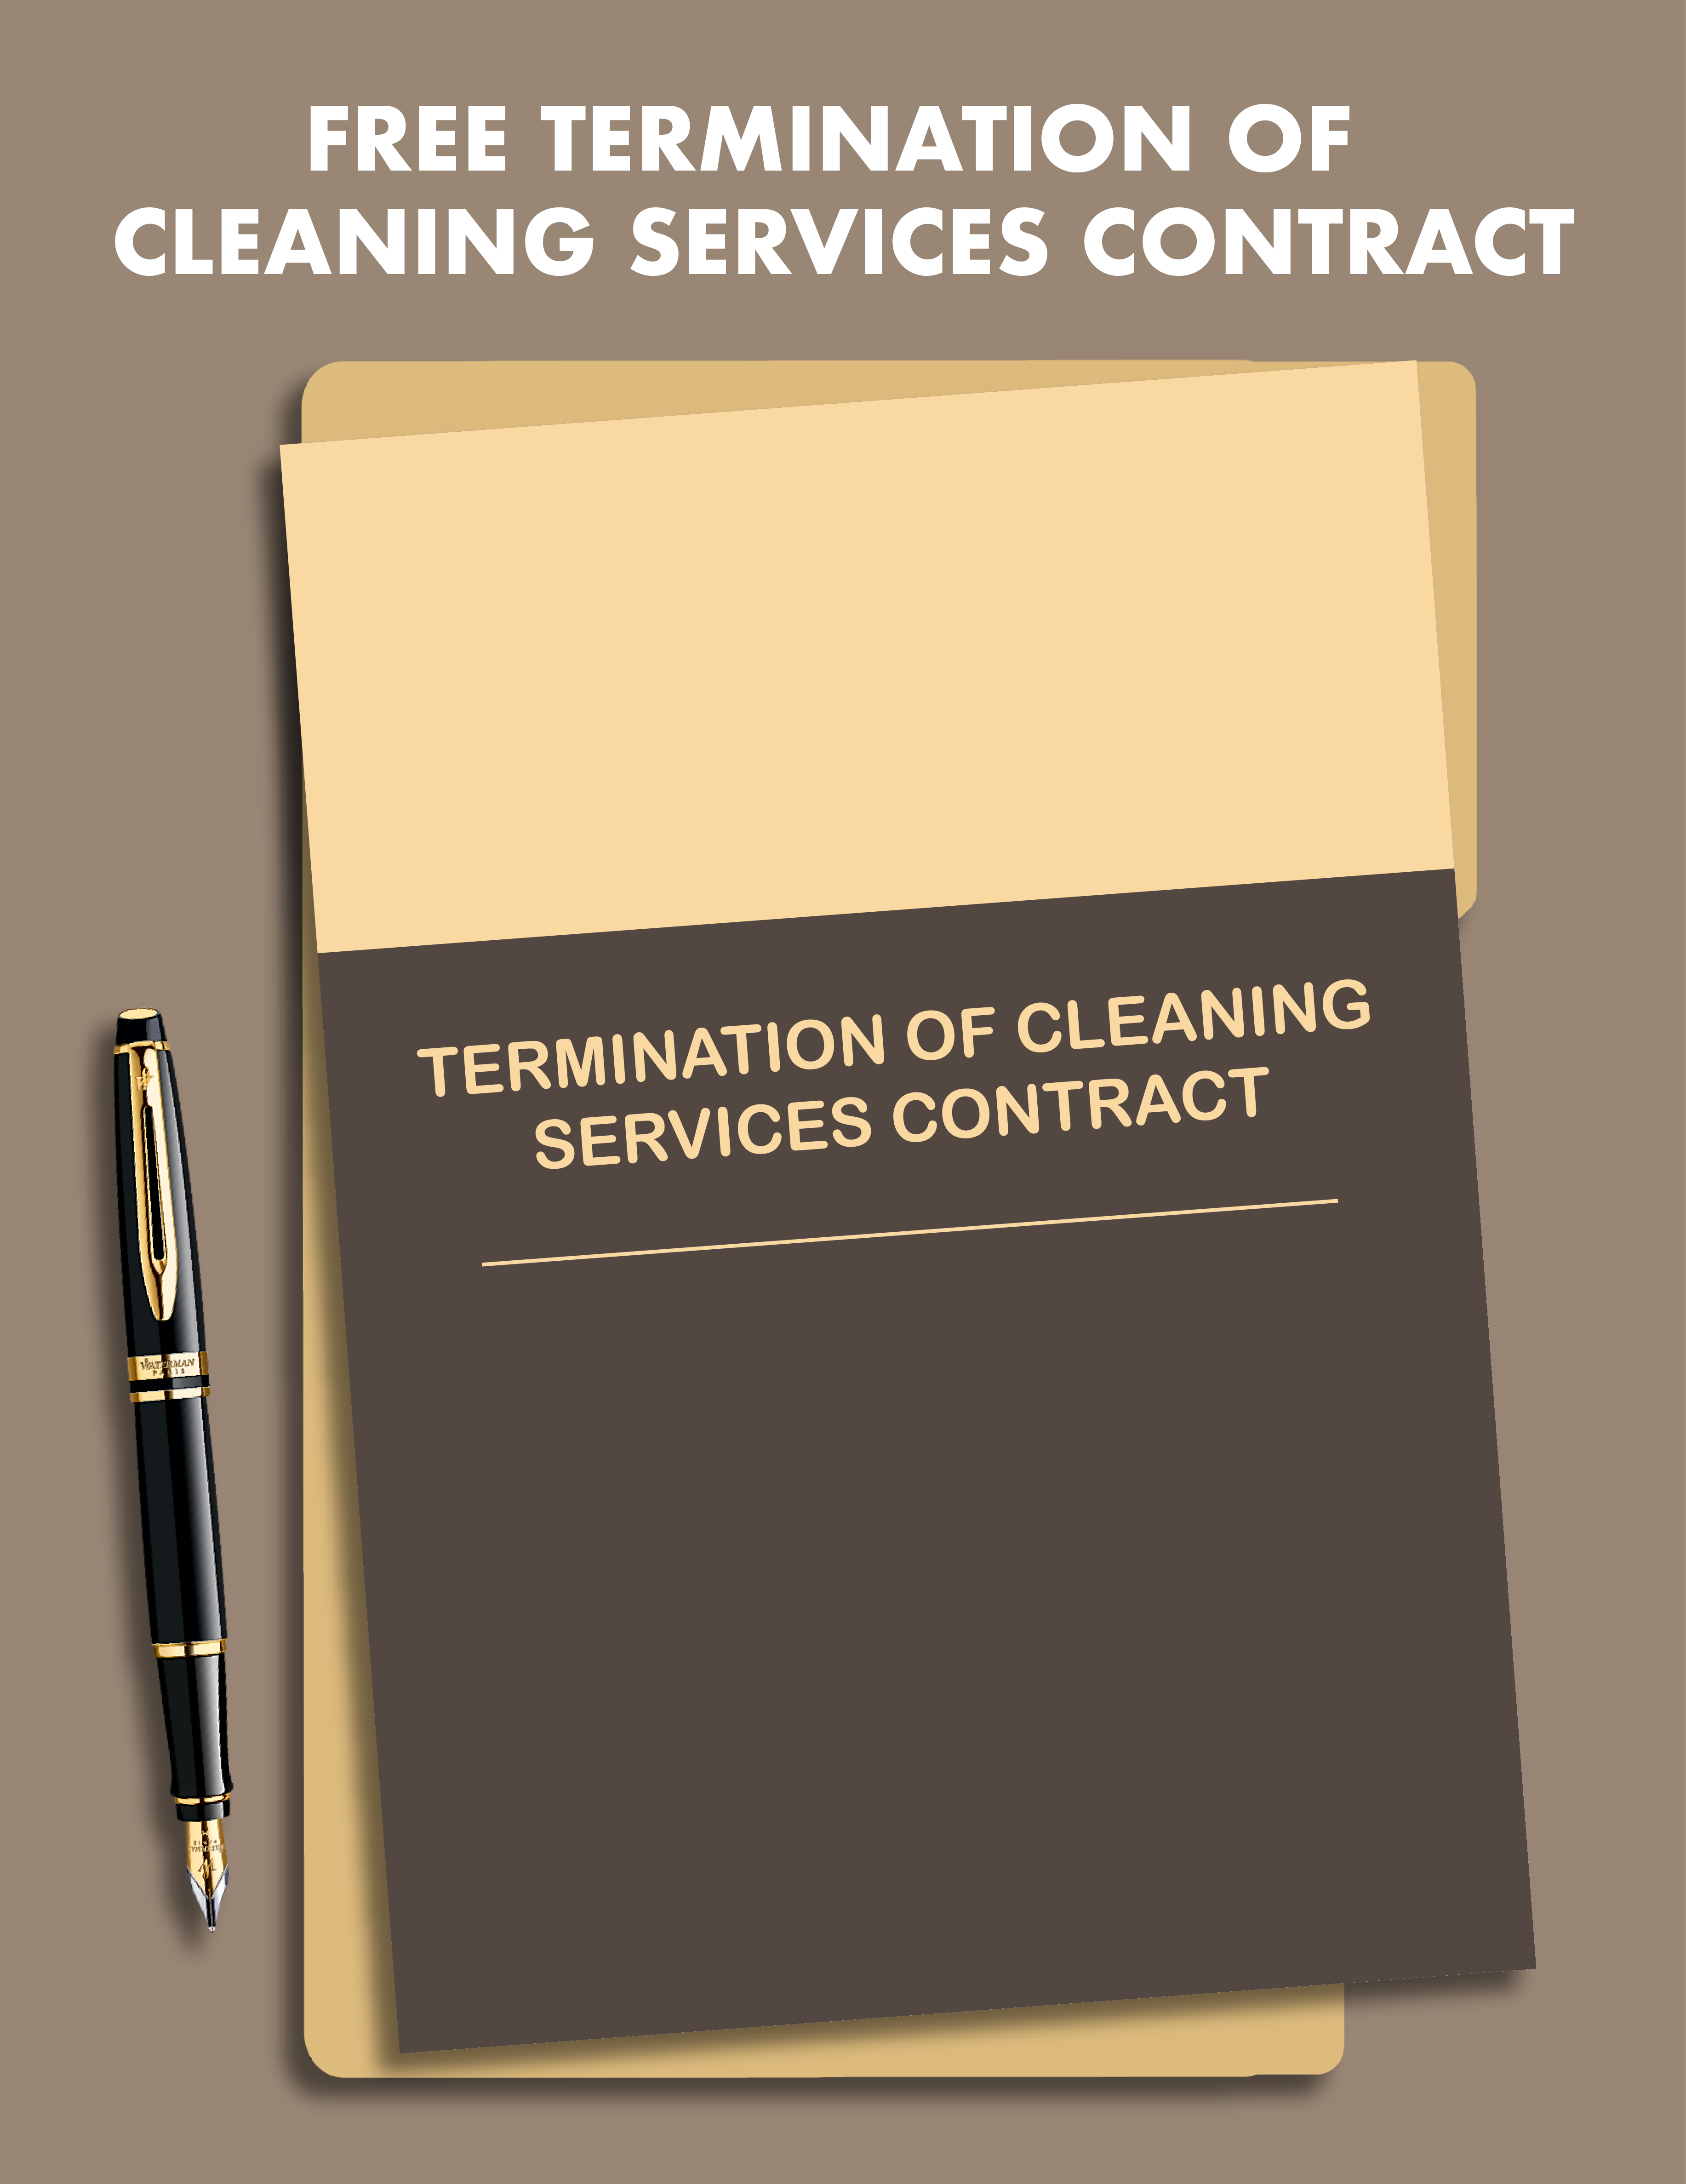 Termination of Cleaning Services Contract Template